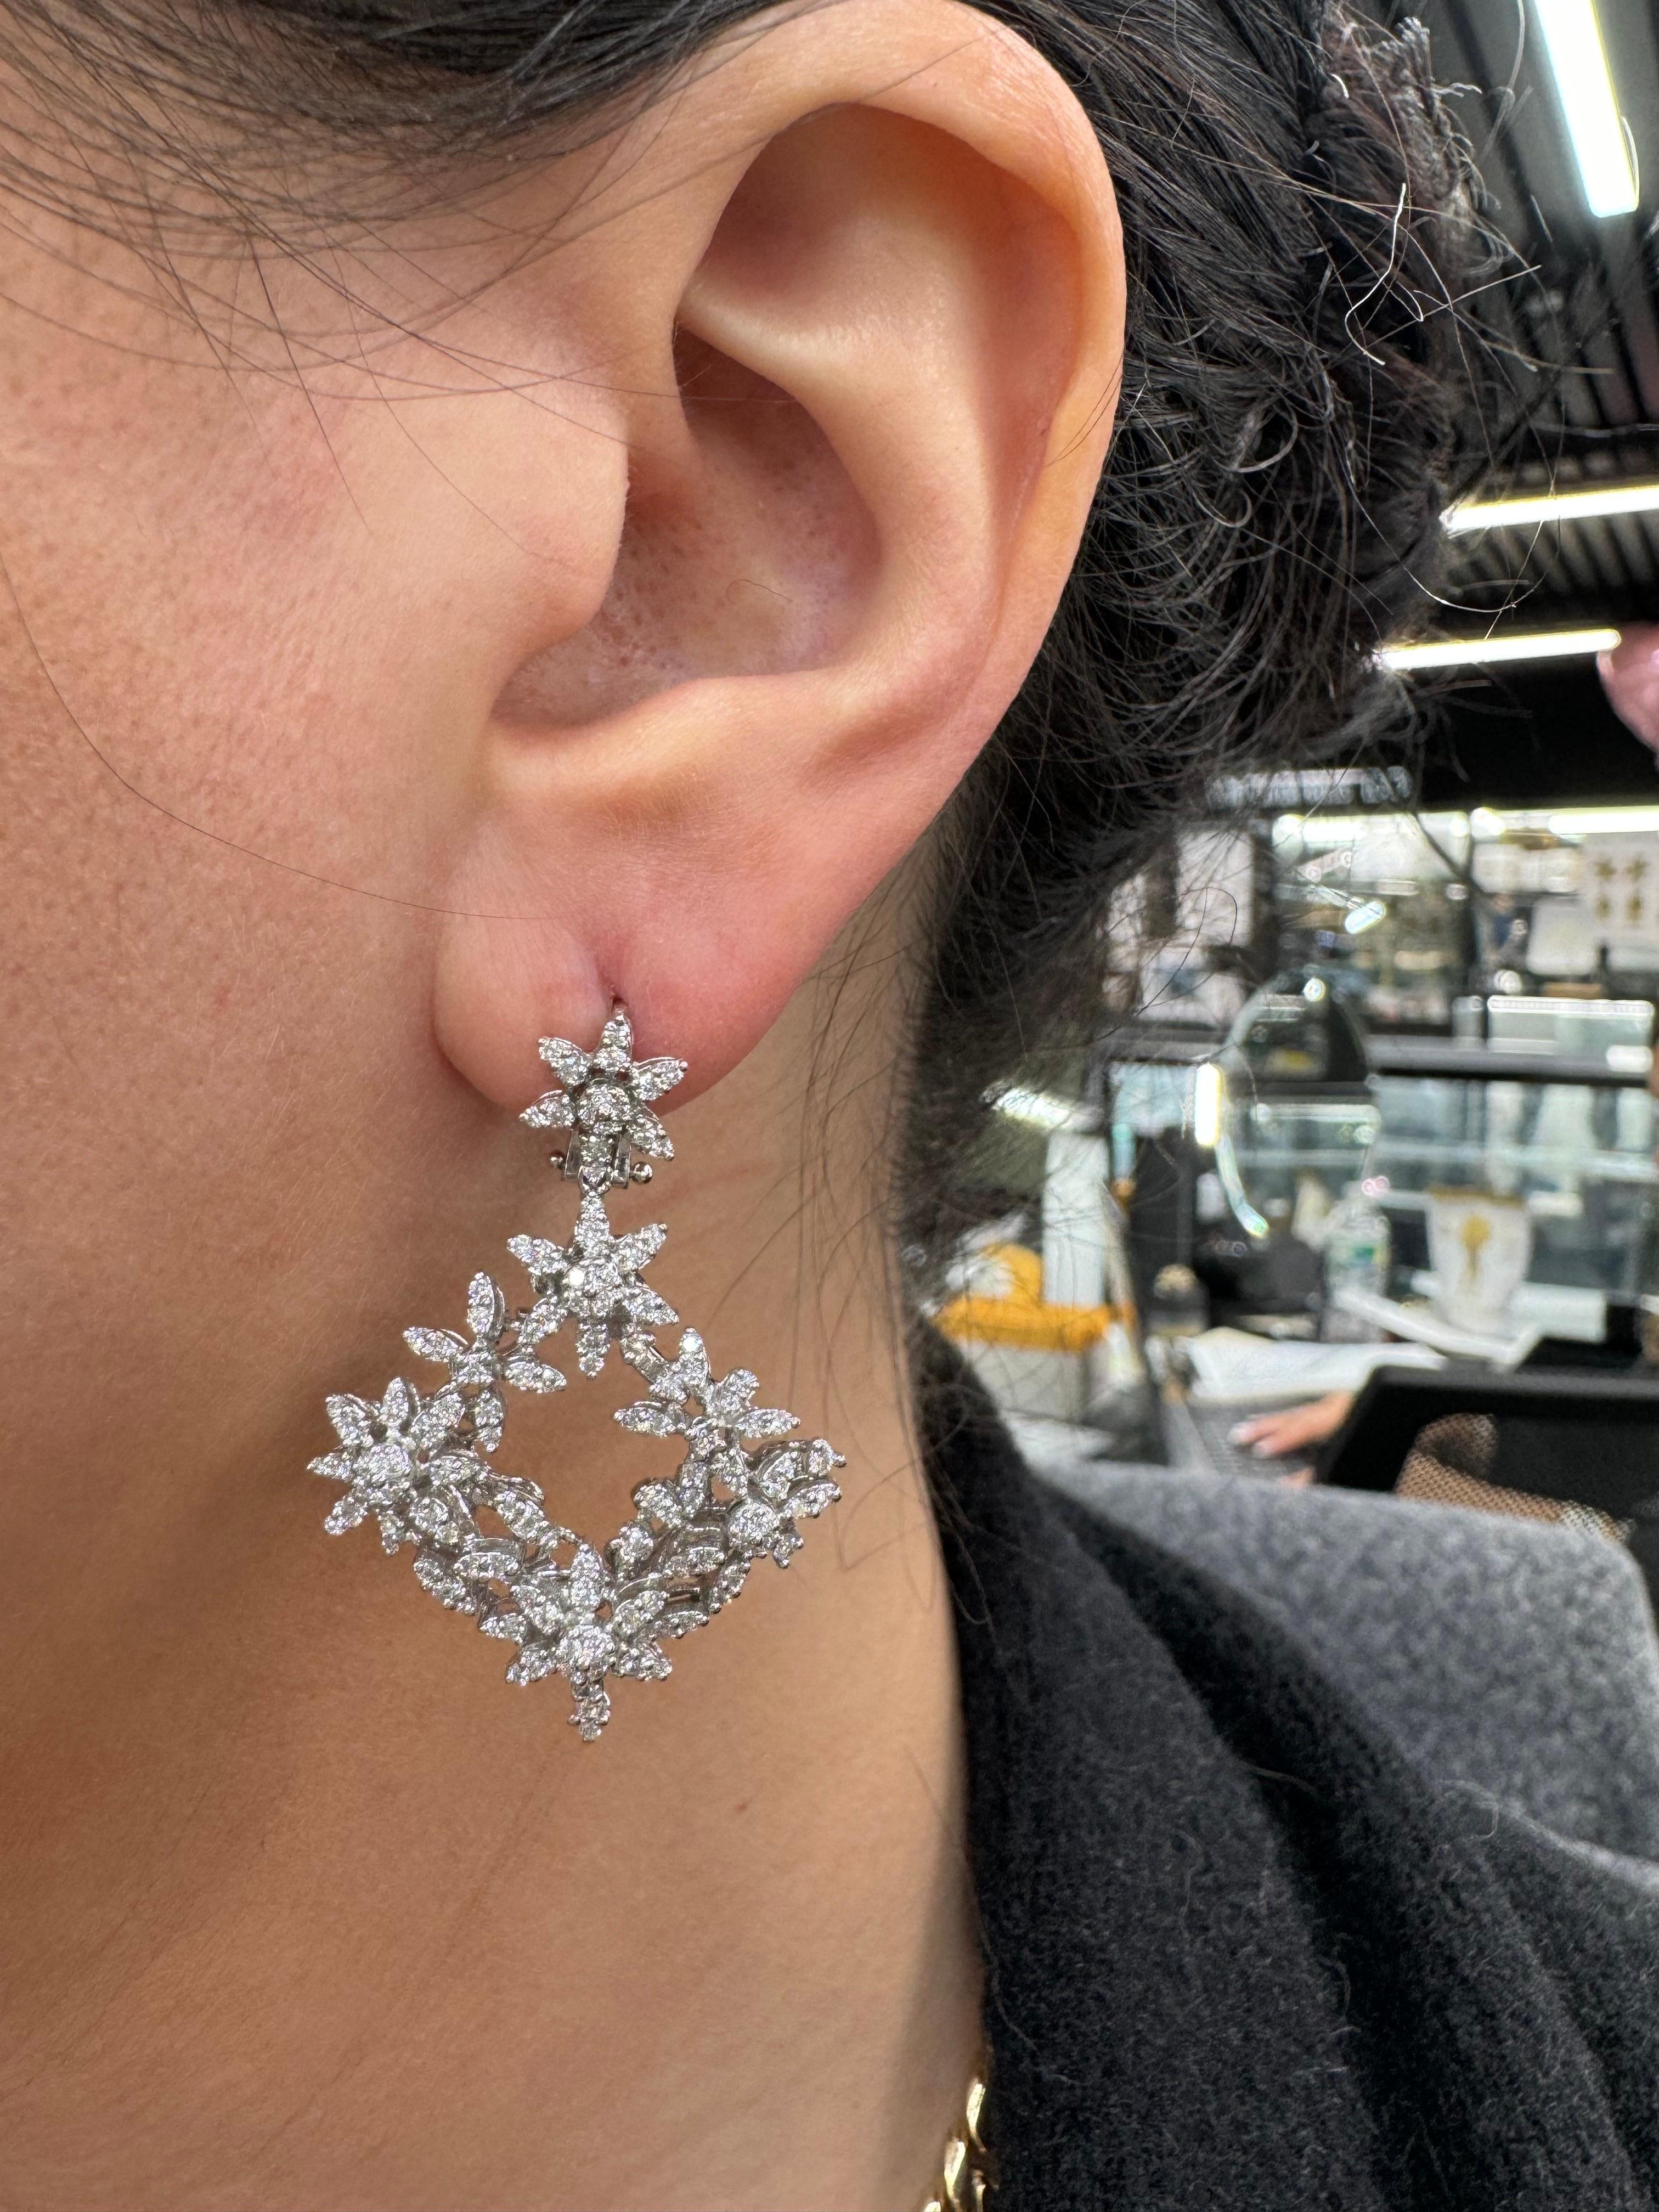 Diamond floral drop earrings featuring a cluster of 246 round brilliants weighing 1.85 carats, in 14 karat white gold.
Color F-G
Clarity VS1-VS2